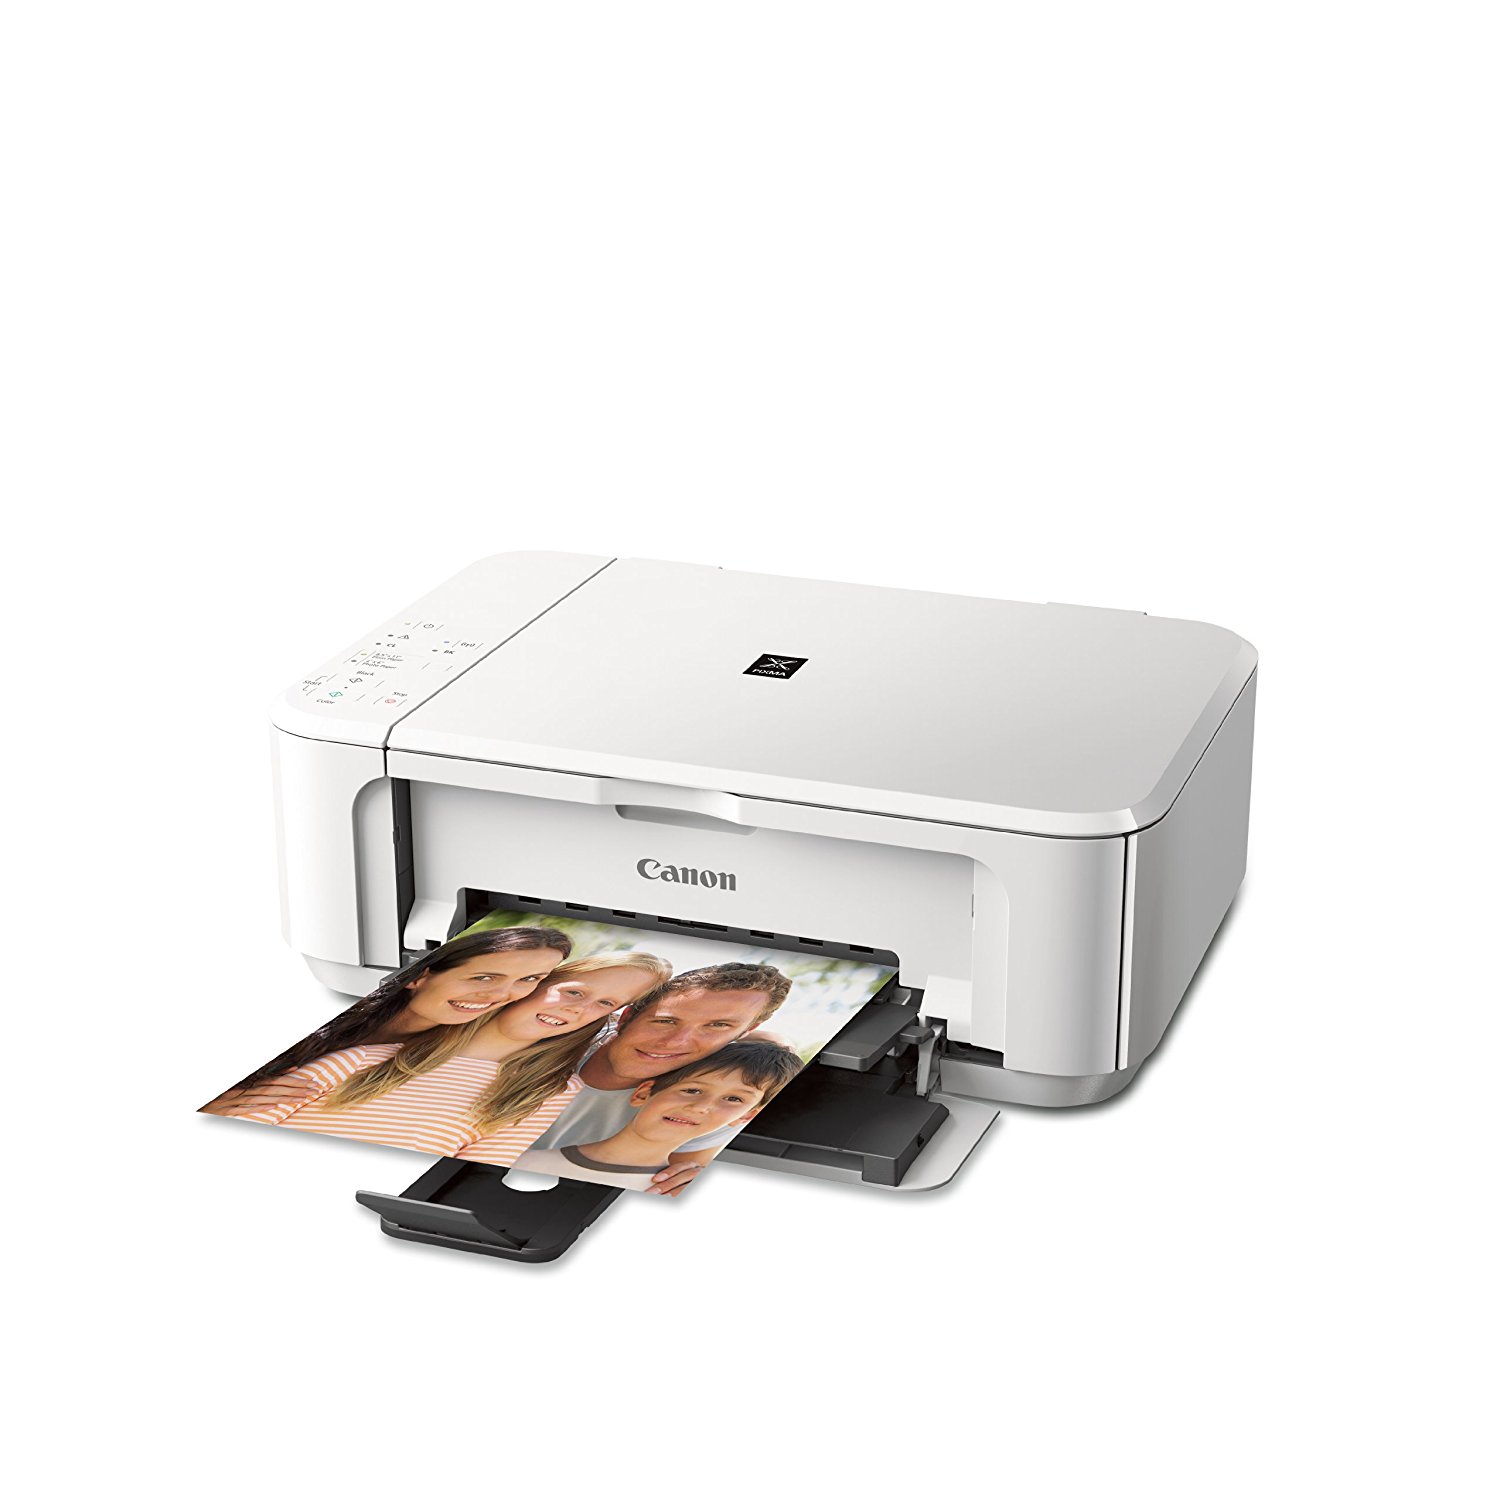 Canon Pixma Mg3520 Wireless Color Printer With Scanner And Copier N2 Free Image Download 3396